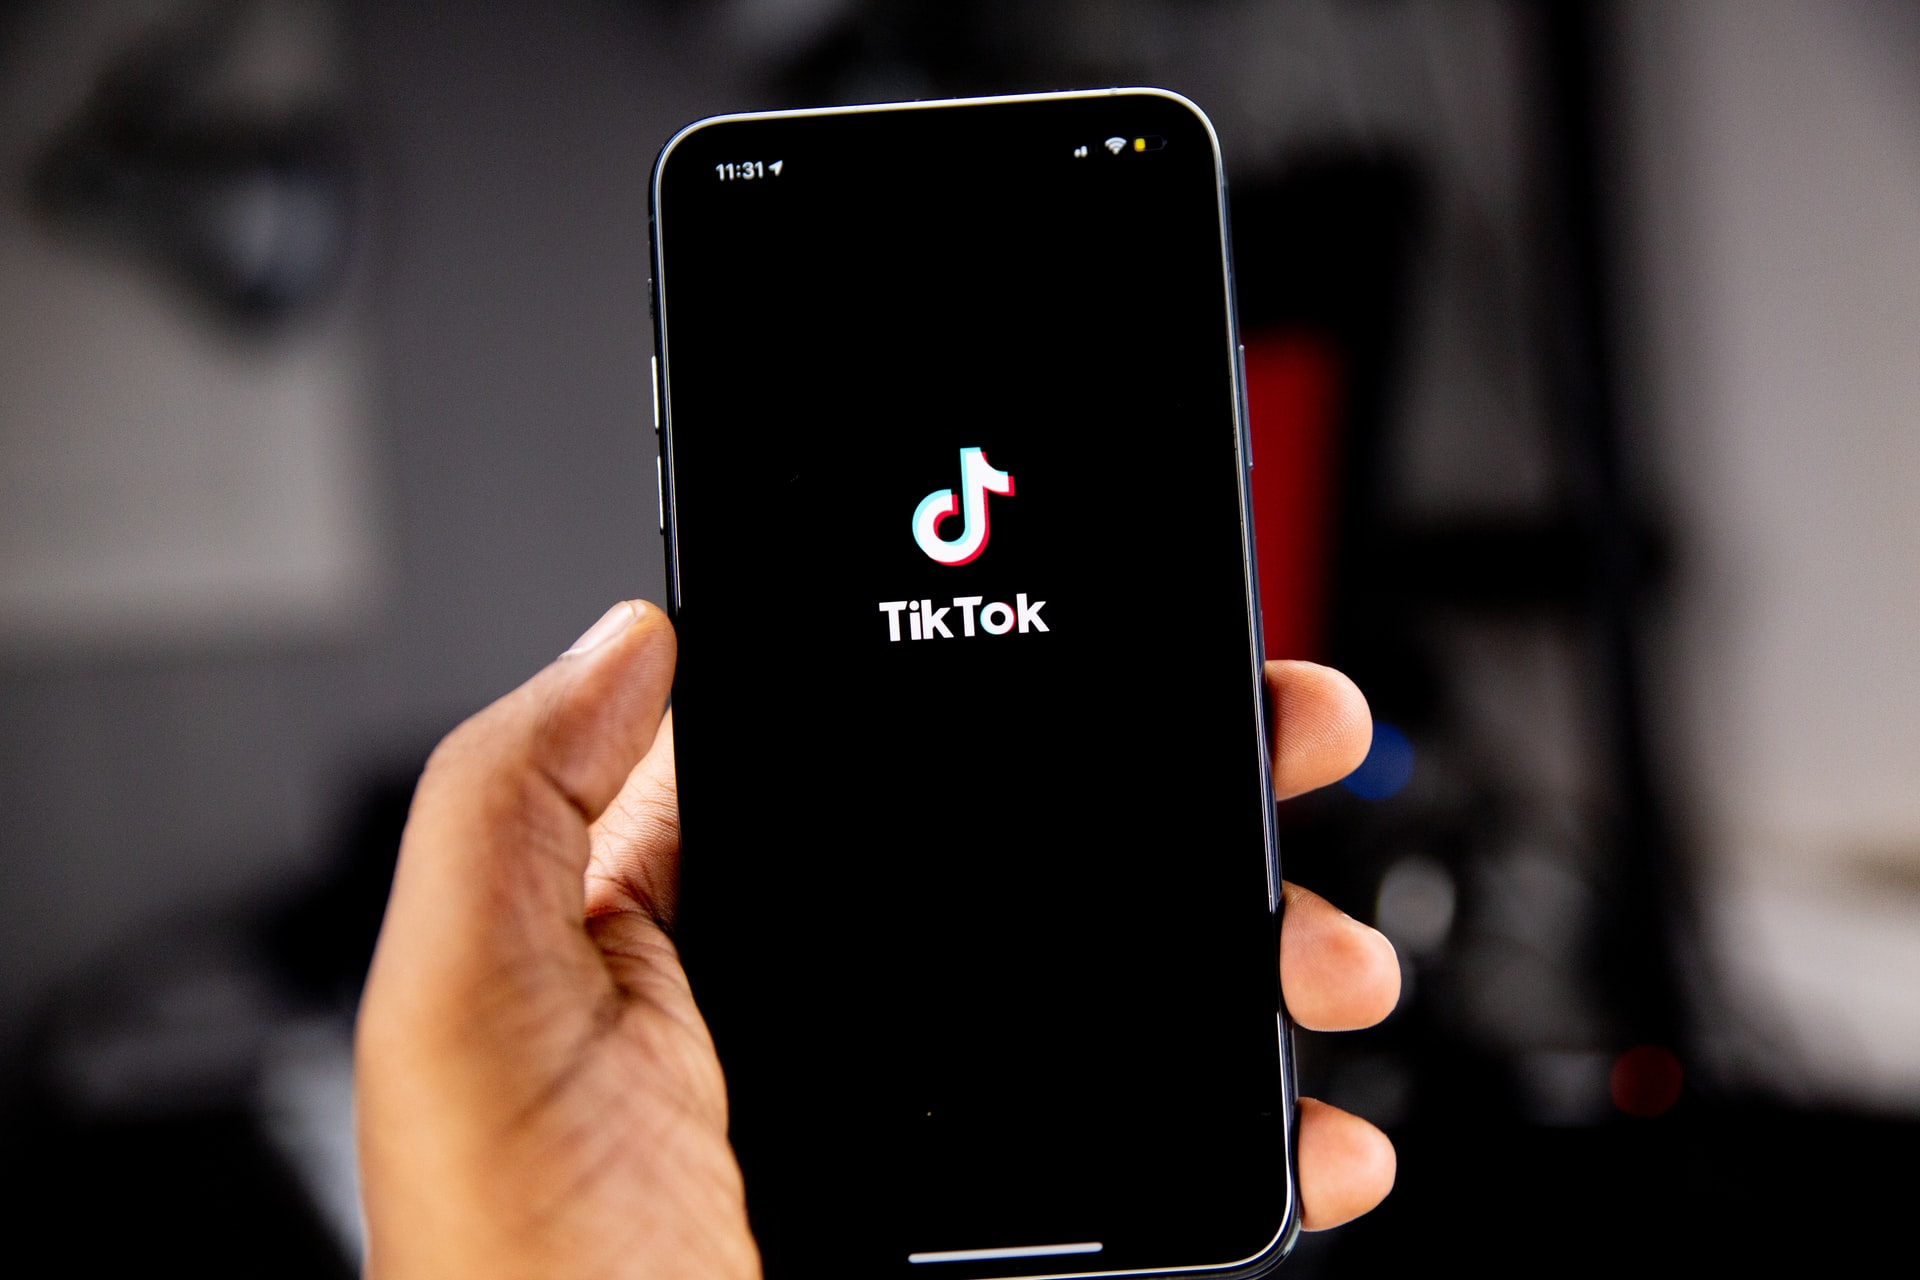 TikTok Announced the Removal of Over 7 Million Underage Accounts from Its Platform